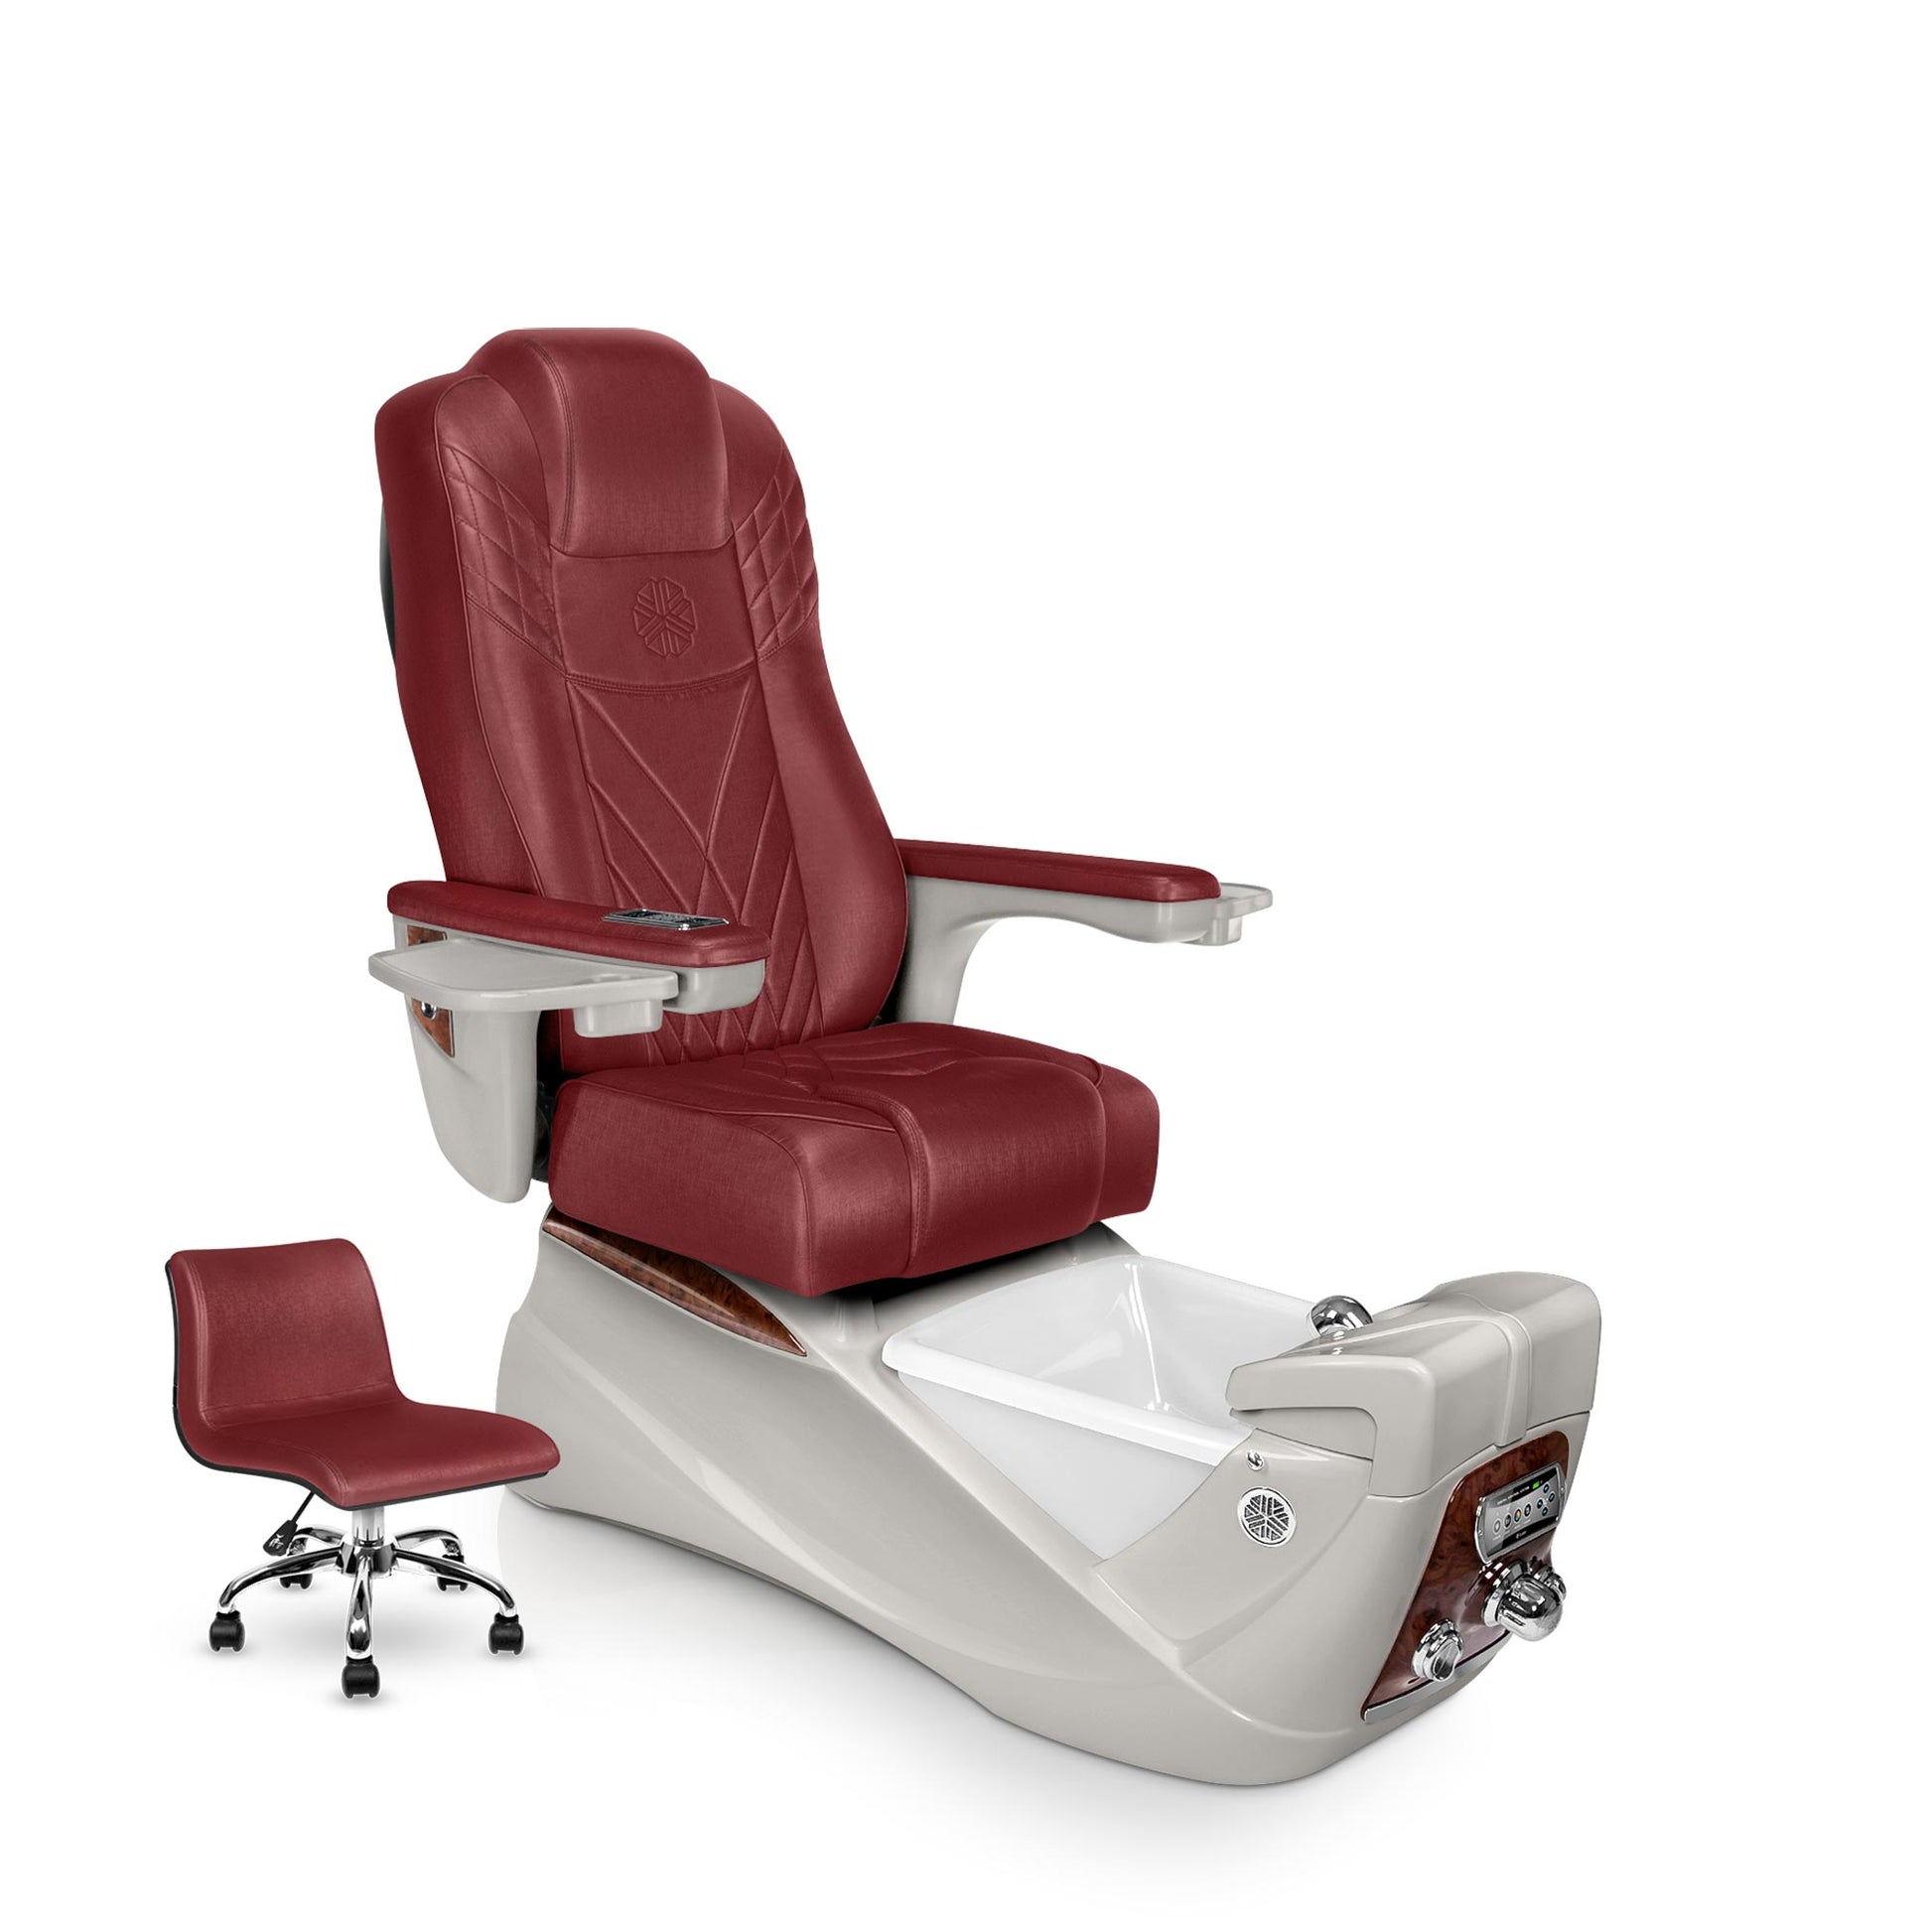 Lexor INFINITY pedicure chair with ruby cushion and sandstone spa base